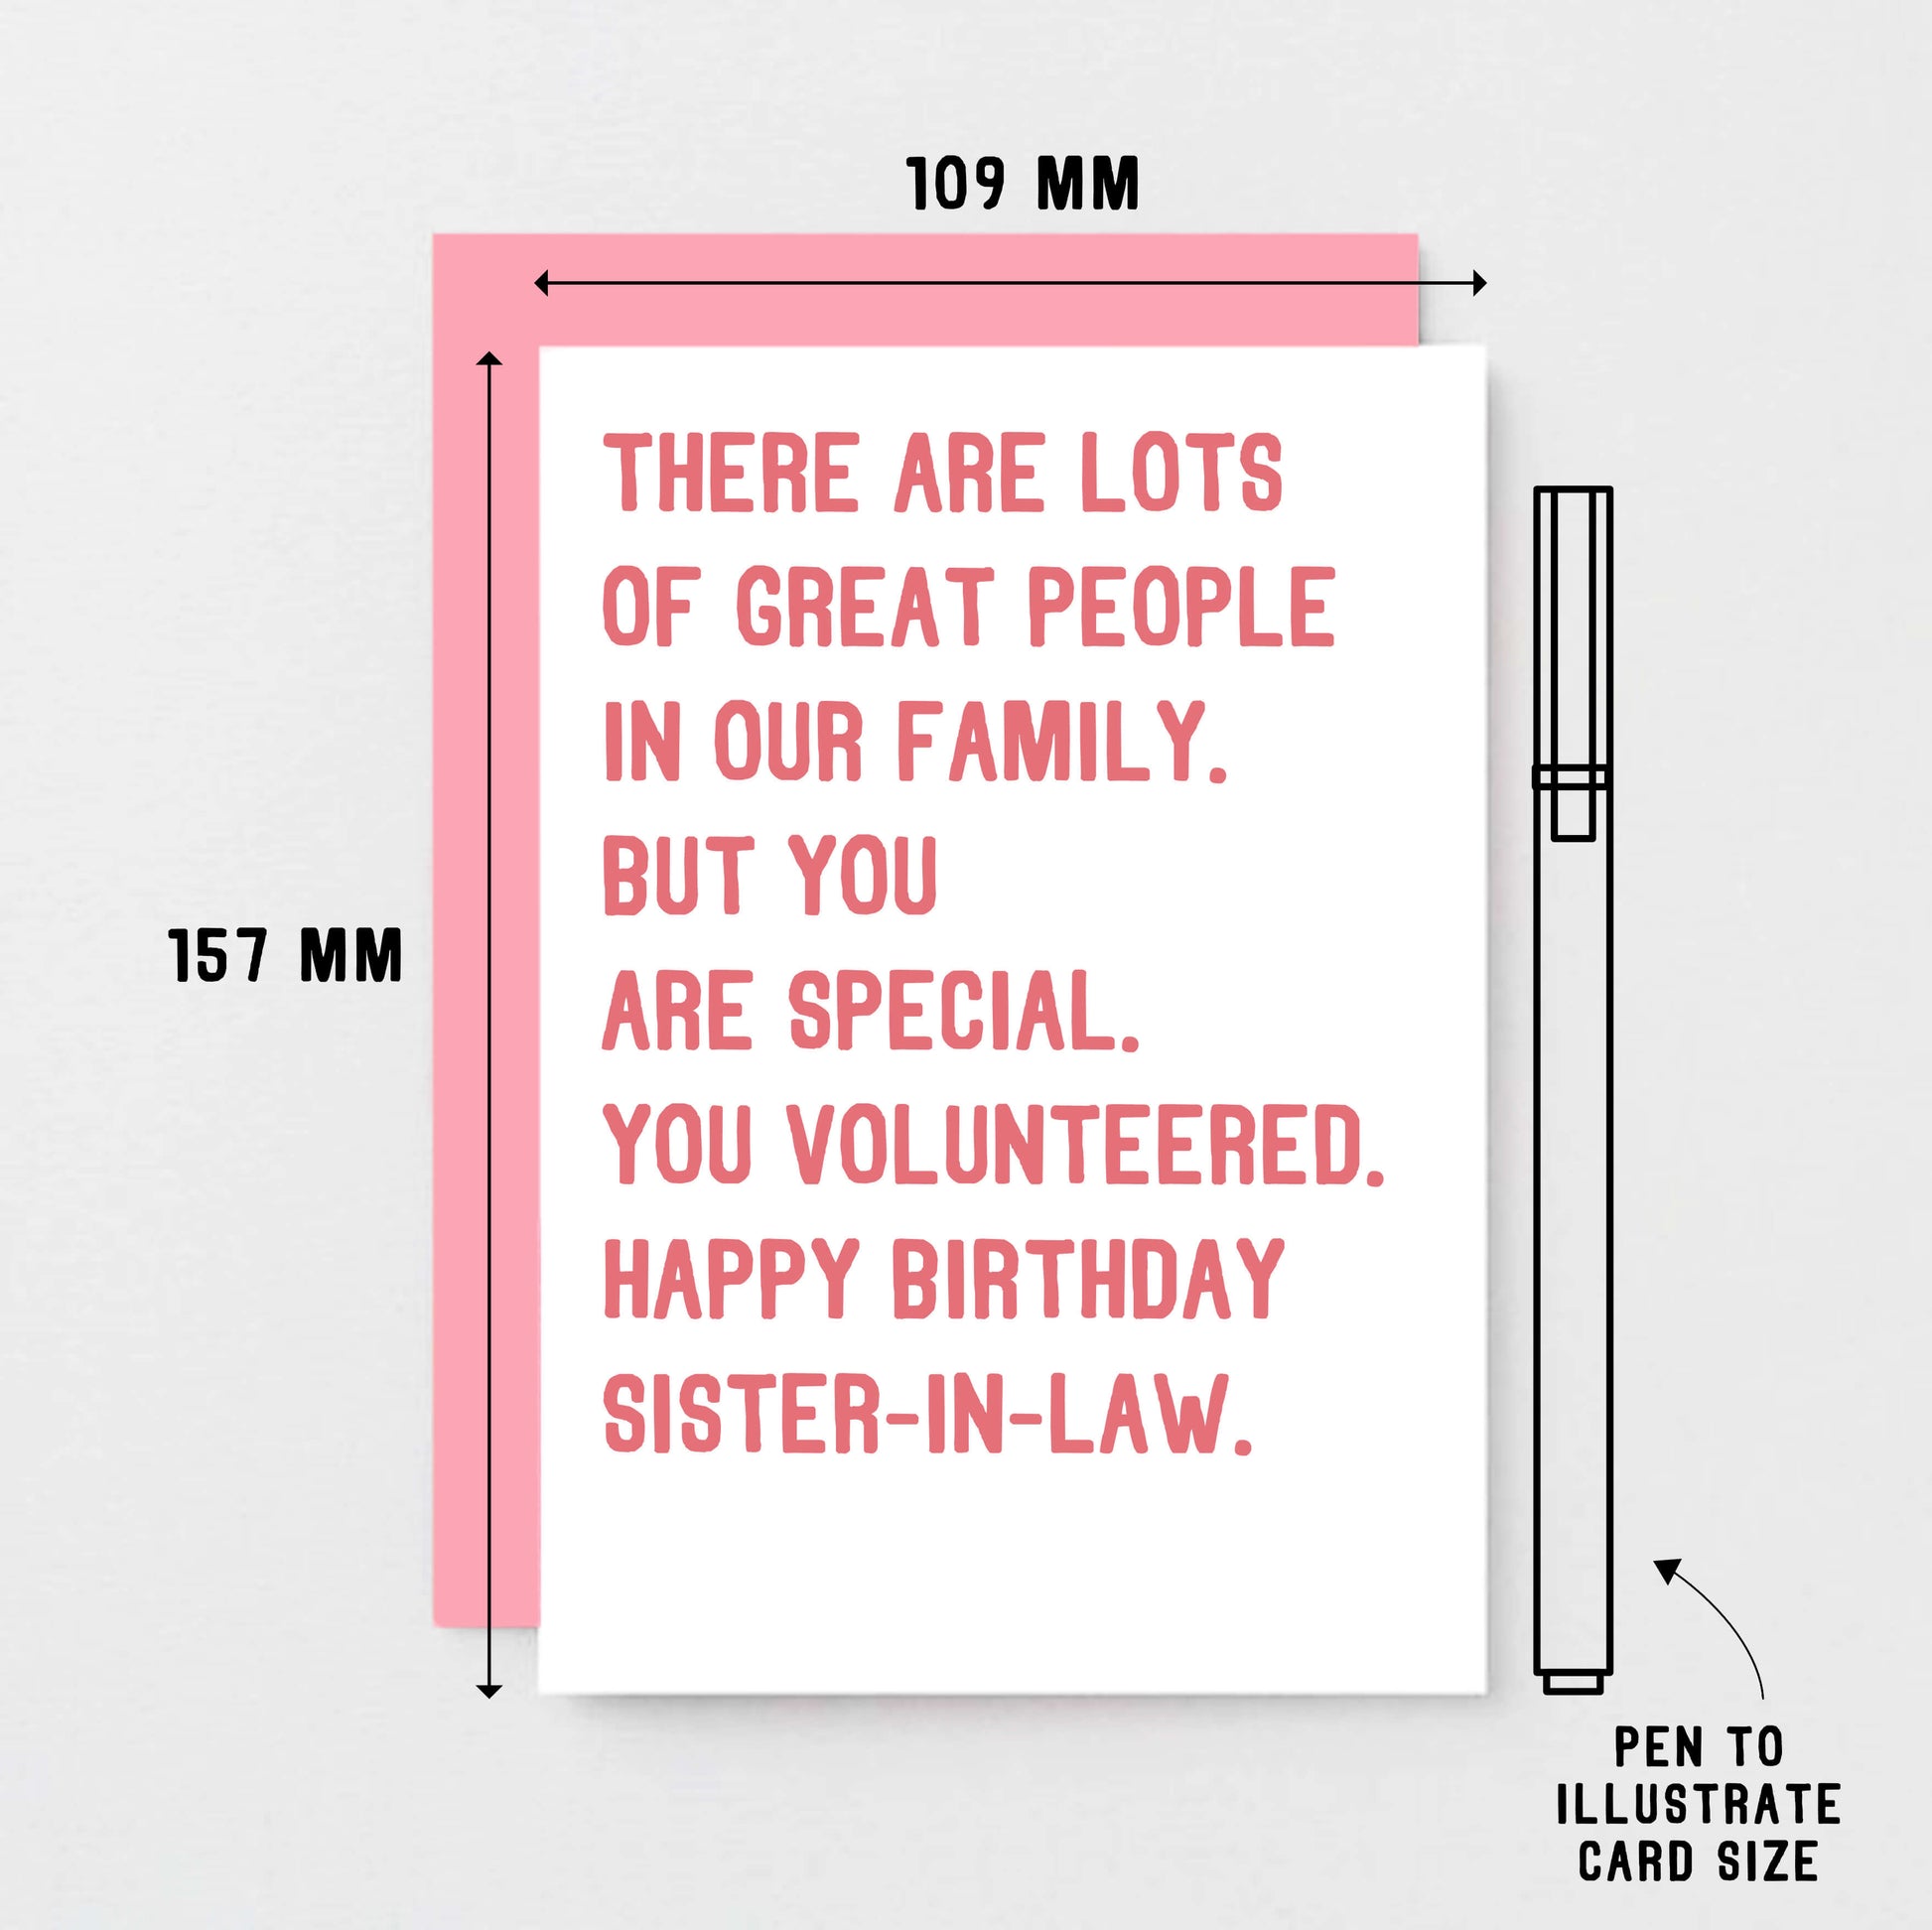 Sister-in-Law Birthday Card by SixElevenCreations. Reads There are lots of great people in our family. But you are special, you volunteered. Happy birthday sister-in-law. Product Code SE2019A6